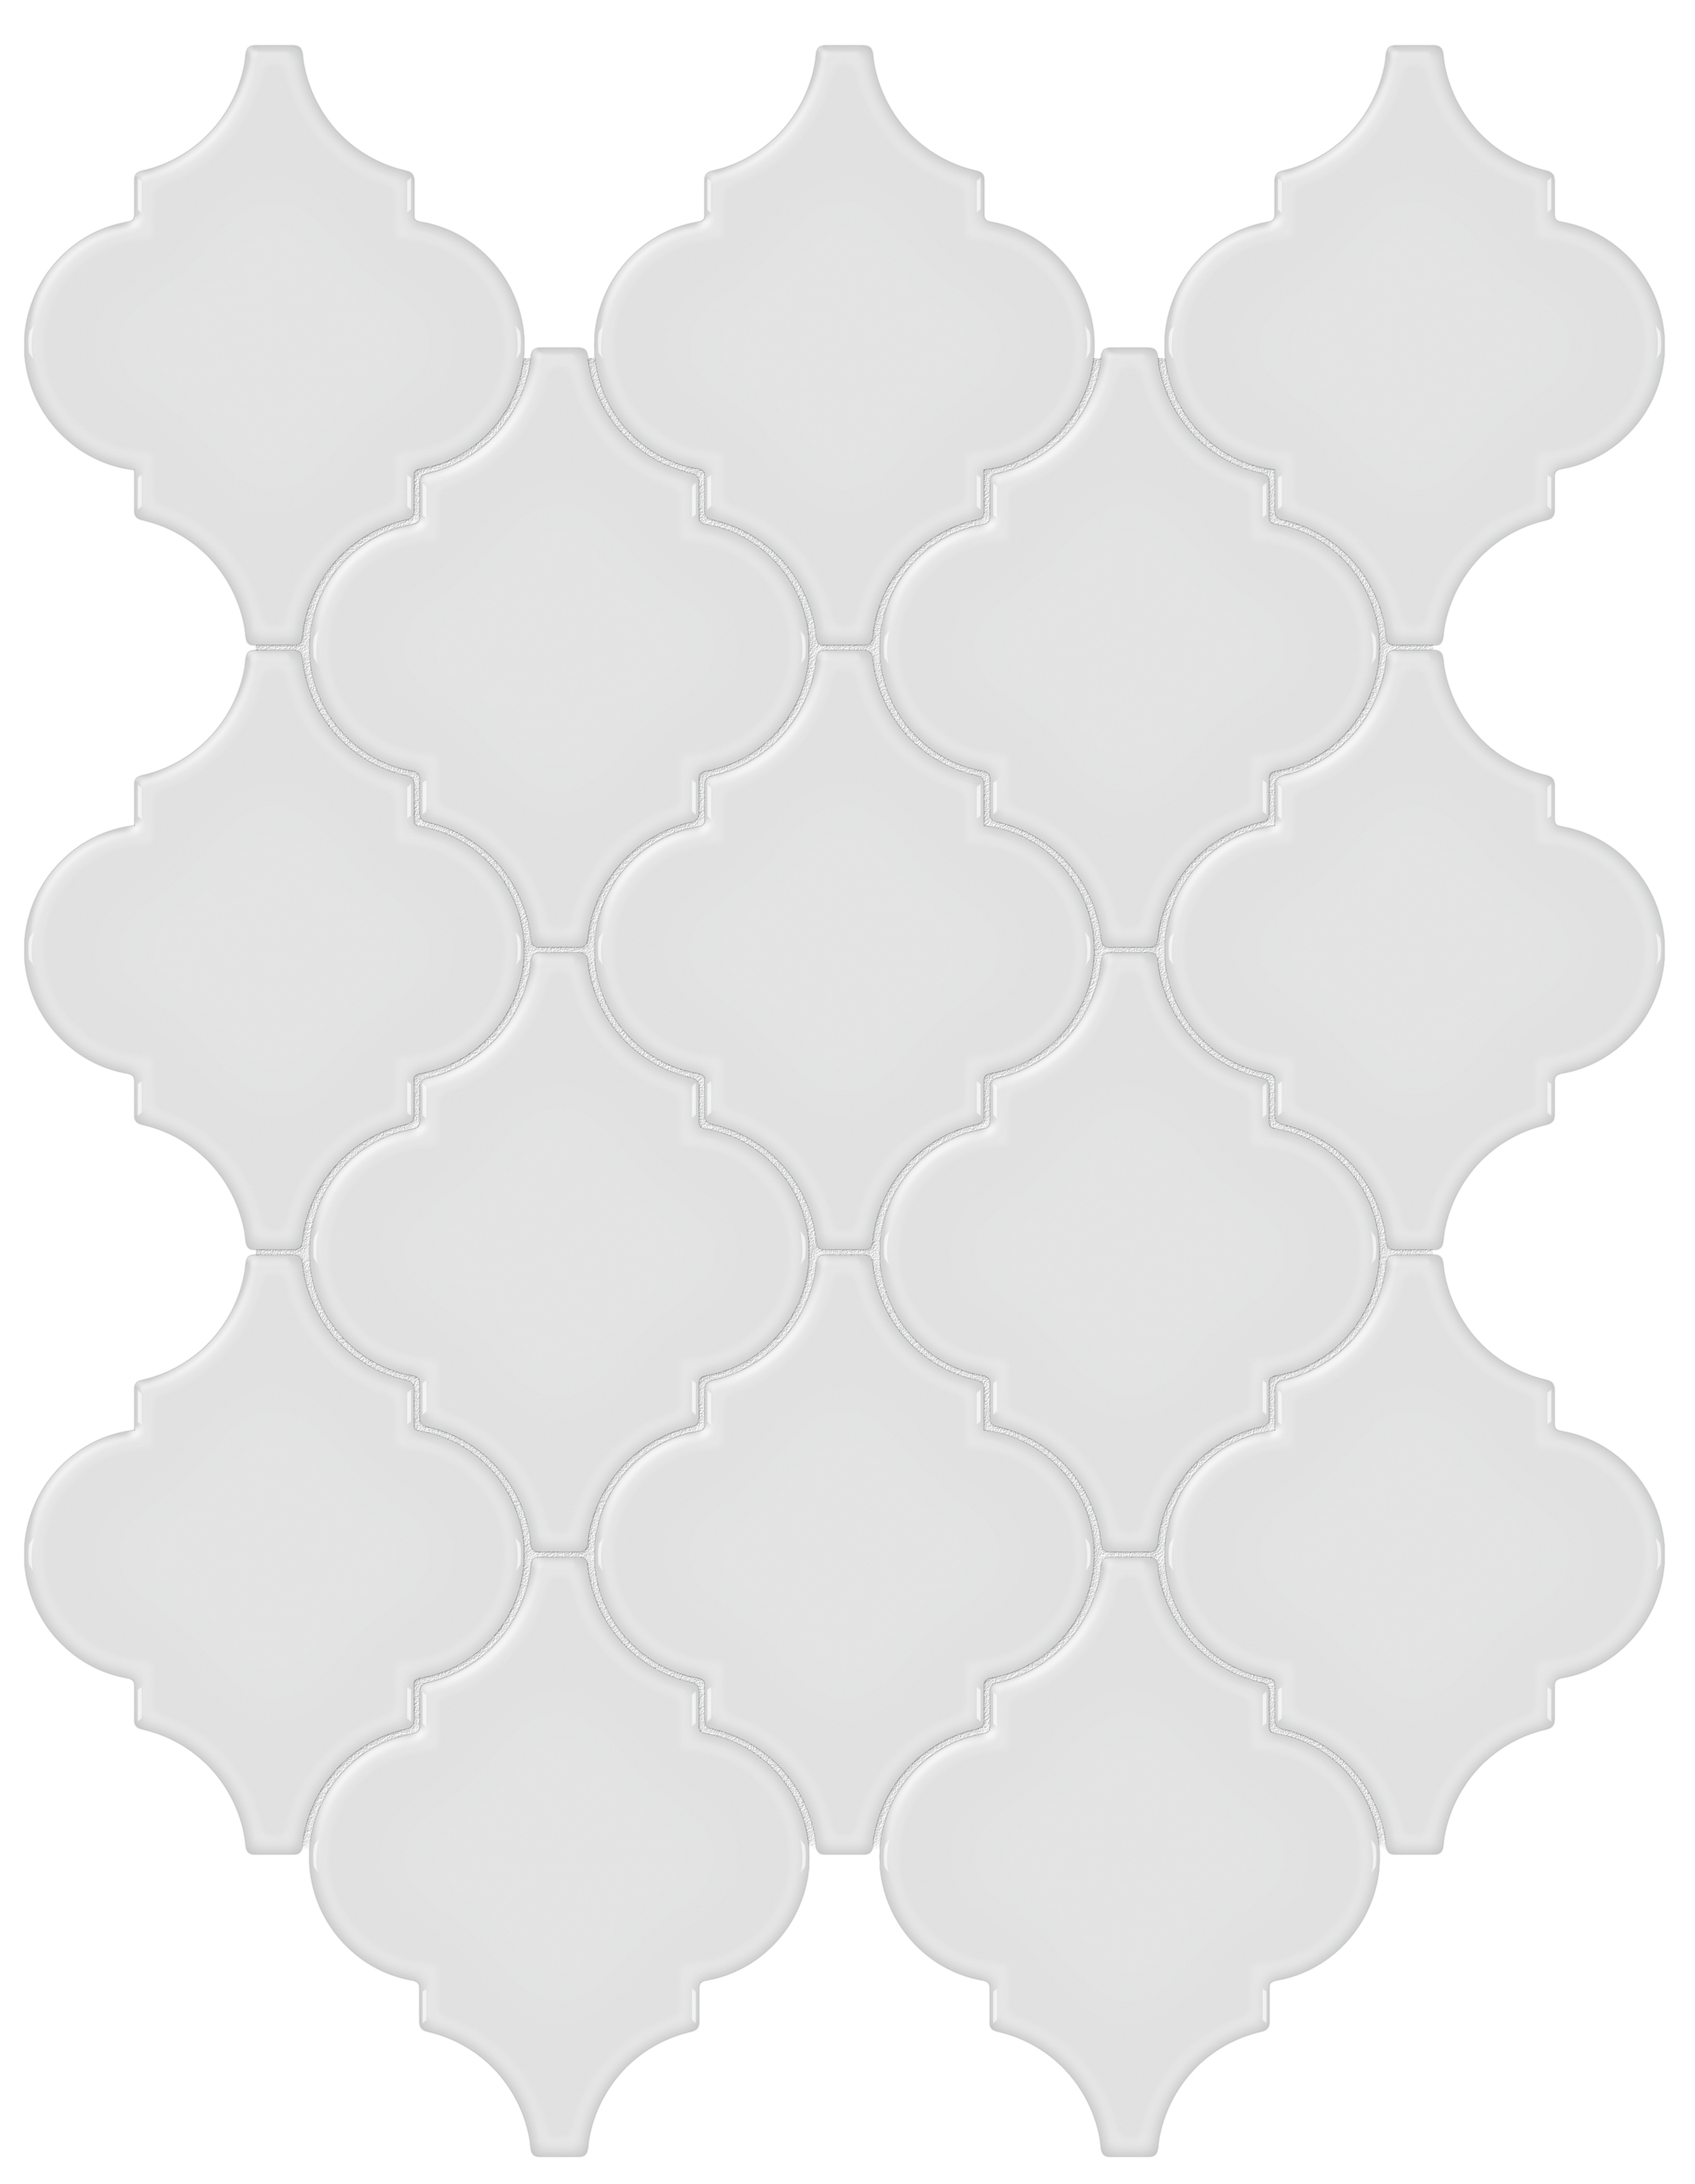 gallery grey arabesque pattern glazed porcelain mosaic from soho anatolia collection distributed by surface group international glossy finish pressed edge mesh shape